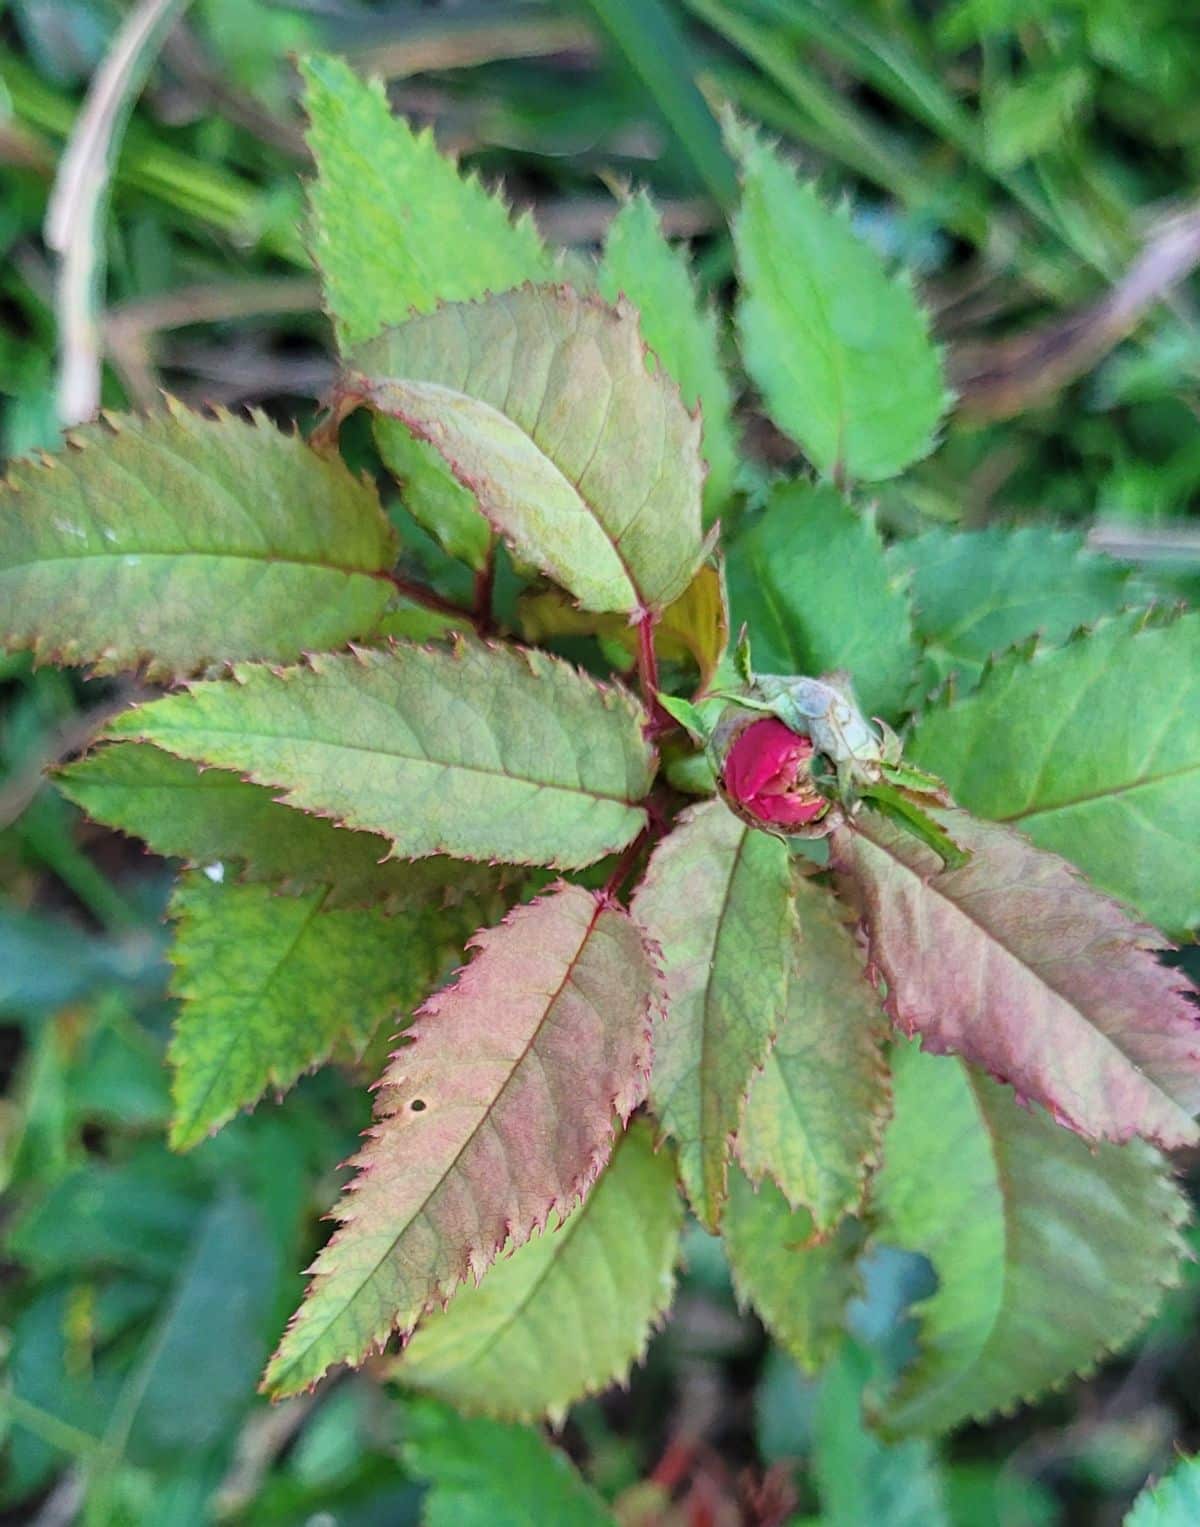 Mutated leaves on a rose with Rosette disease